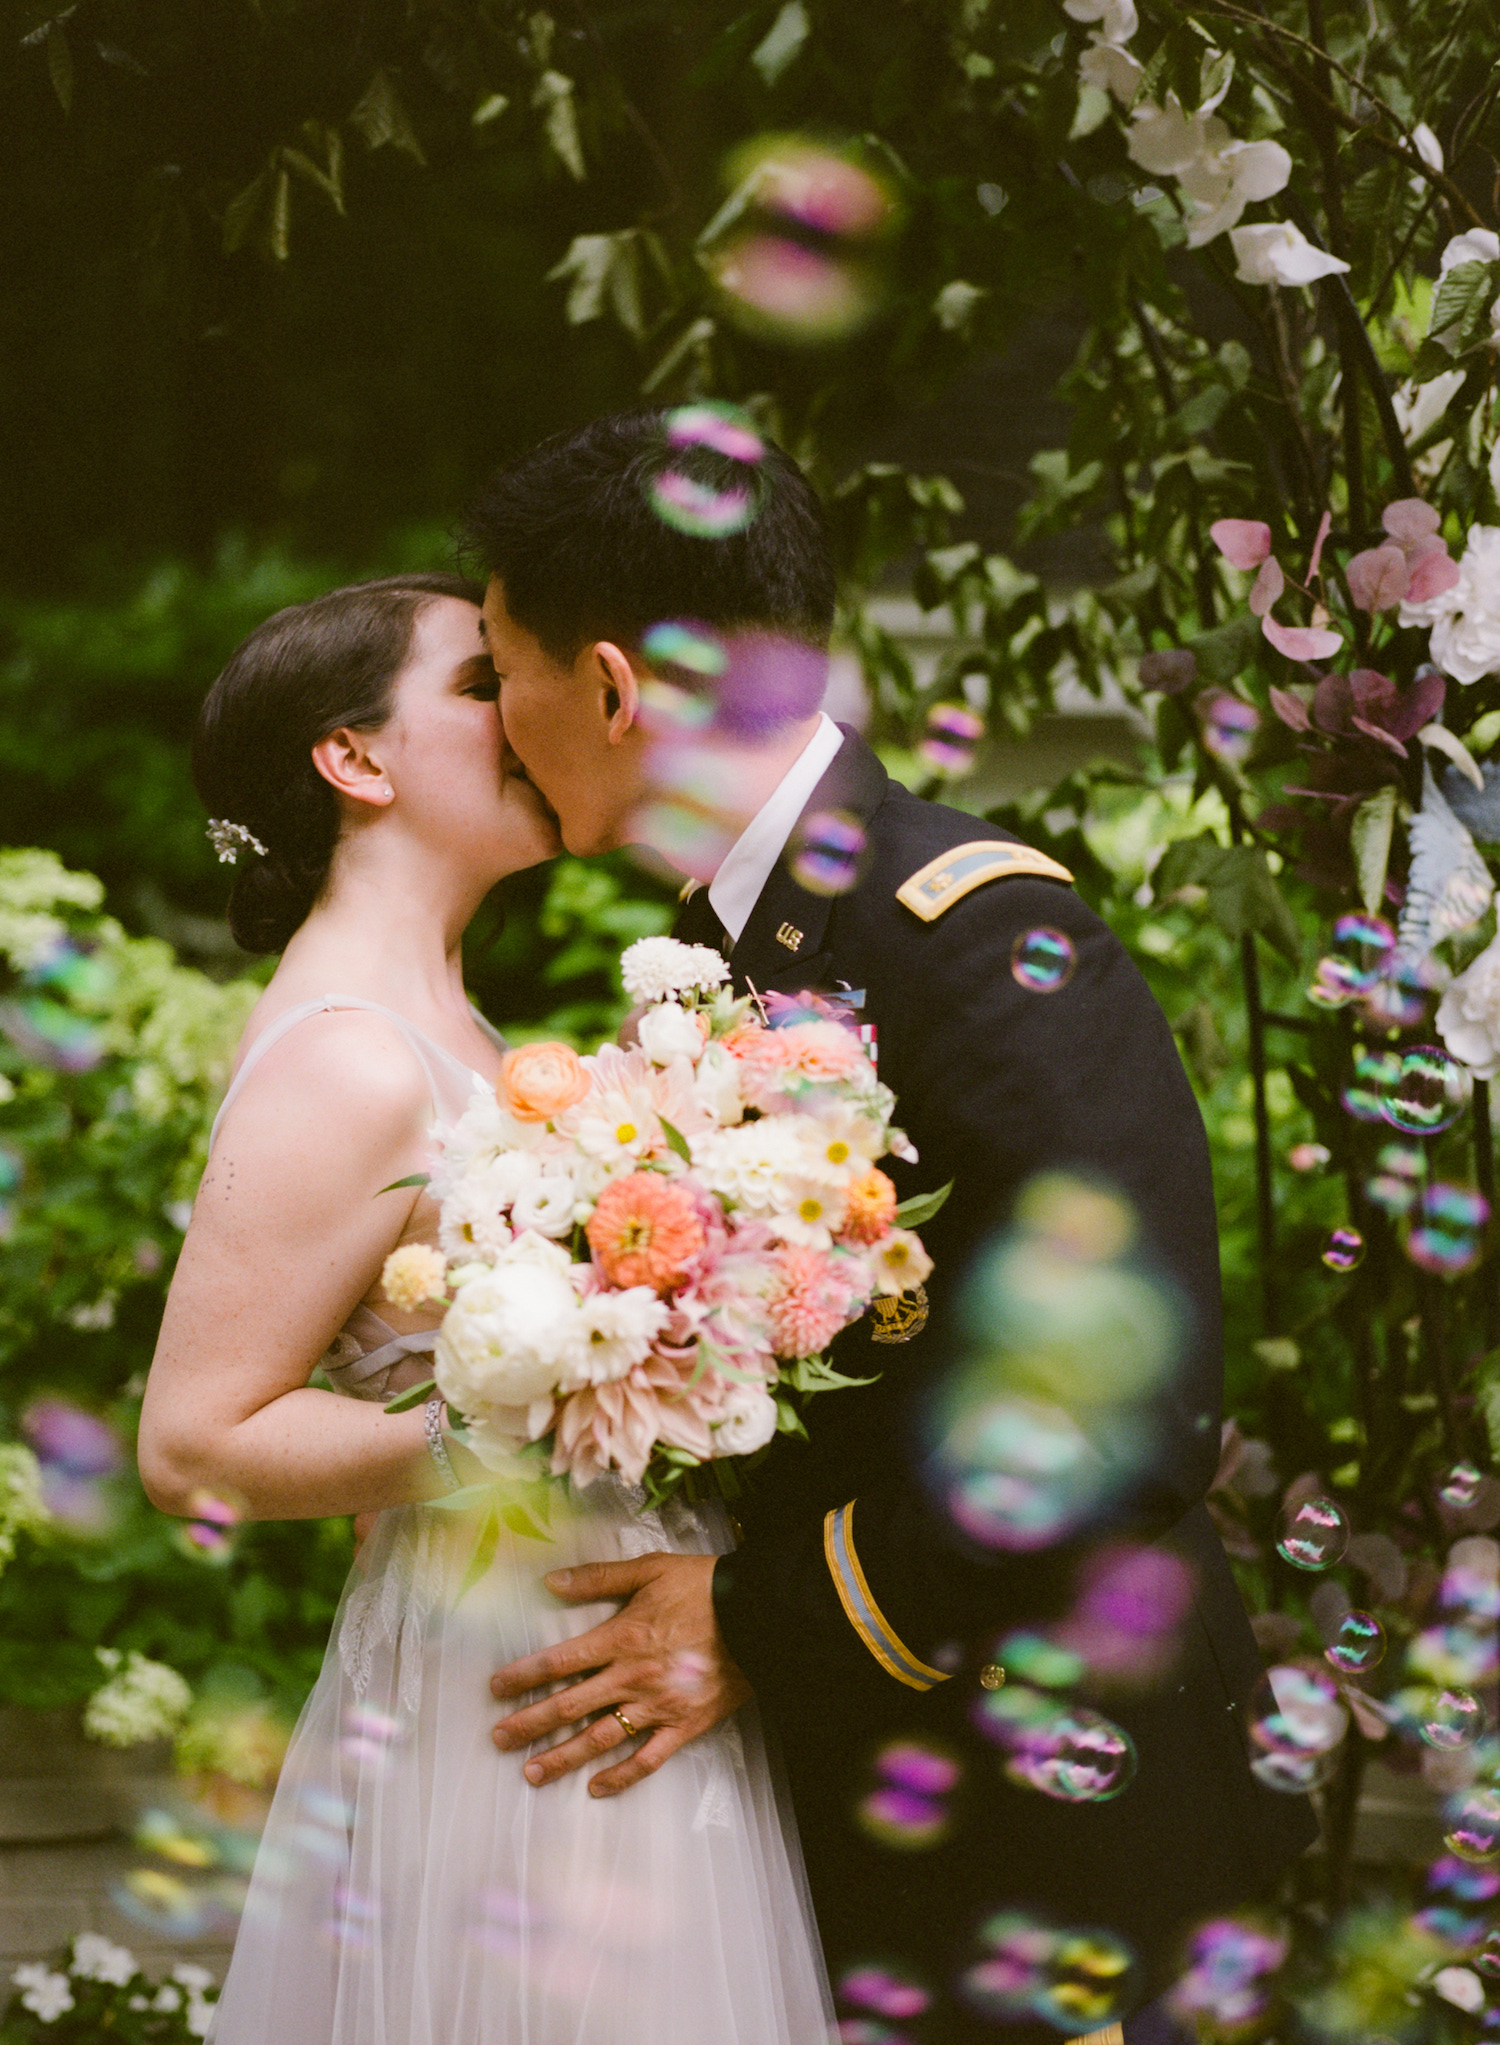 Bride and groom kiss in the garden during their wedding. Image by Victoria Heer, Washington DC wedding photographer as an example of an image you'd like to see when you ask your wedding photographer these 5 questions.